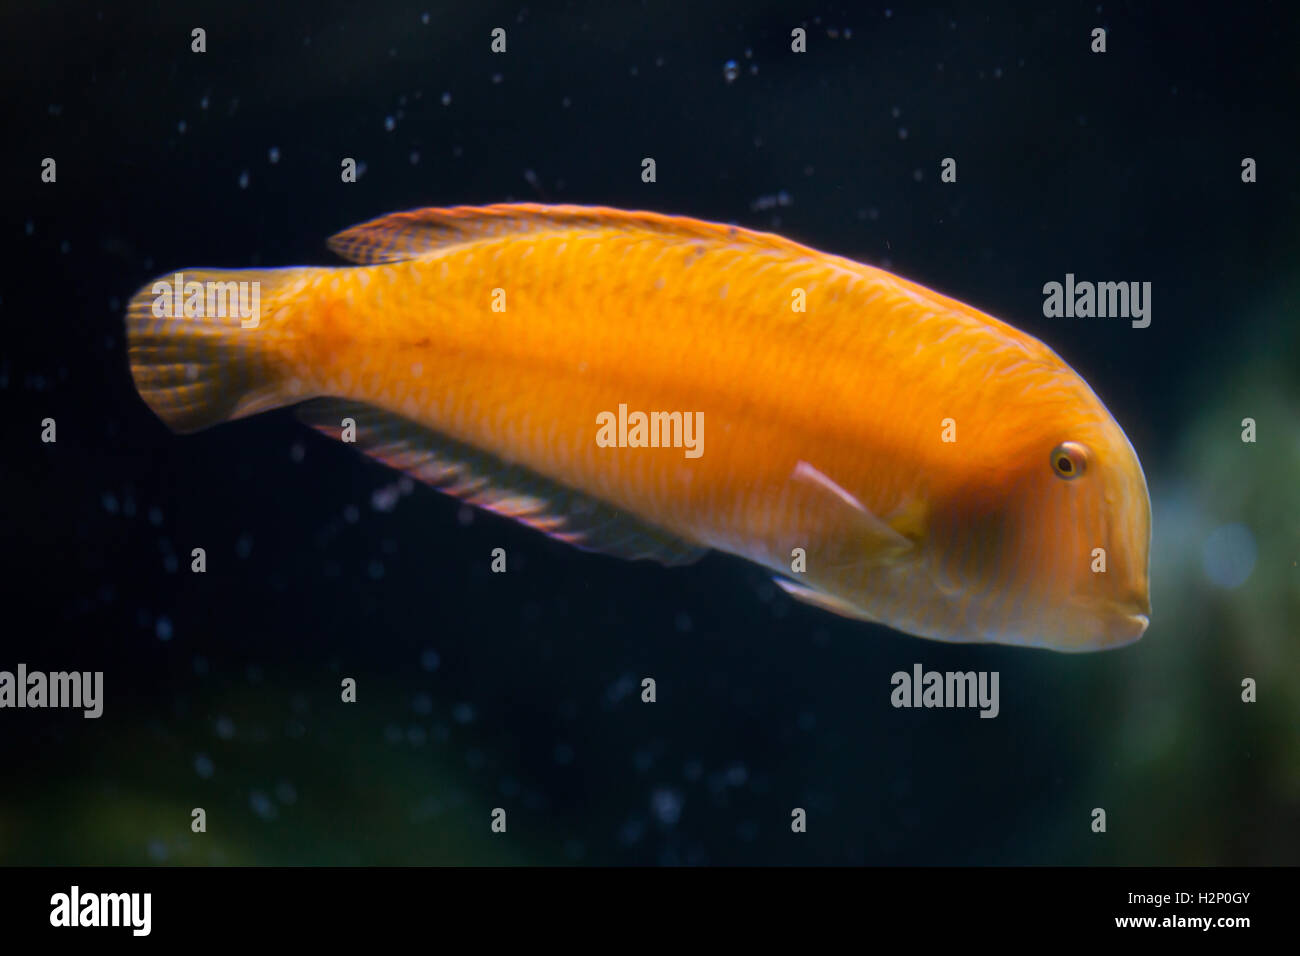 Pearly razorfish (Xyrichtys novacula), also known as the cleaver wrasse. Stock Photo